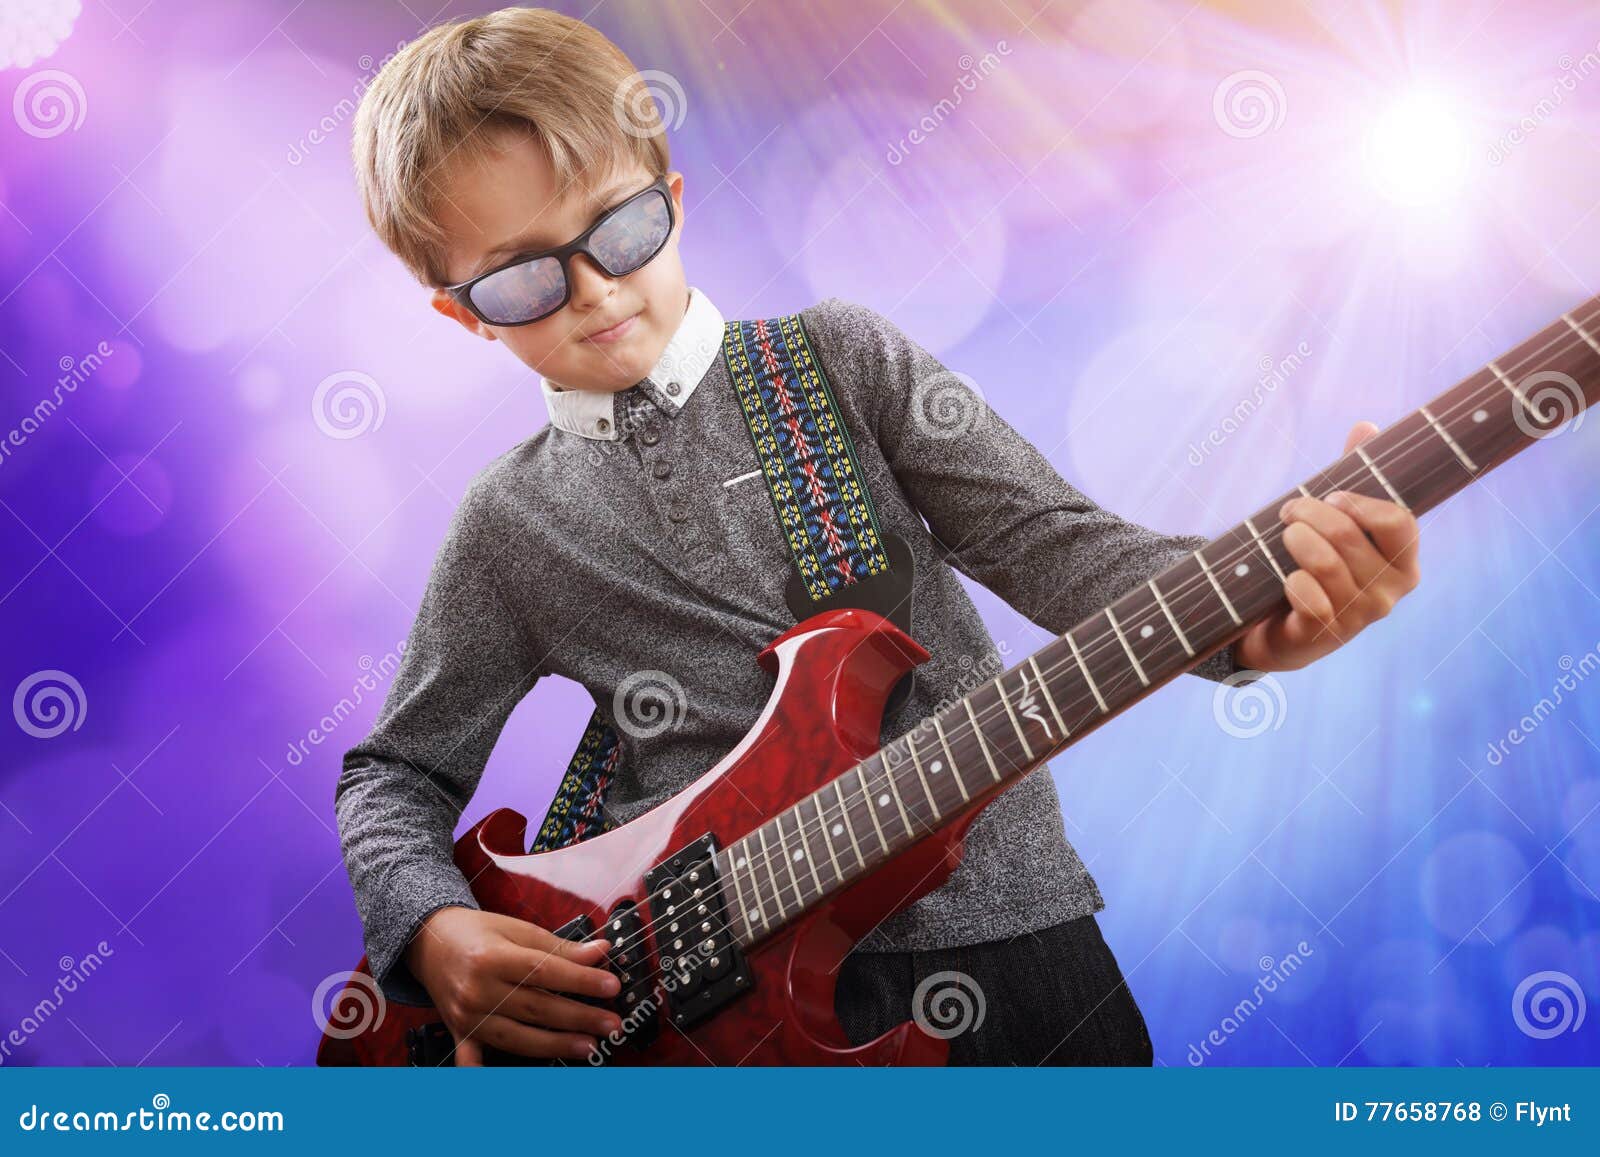 boy playing electric guitar in talent show on stage